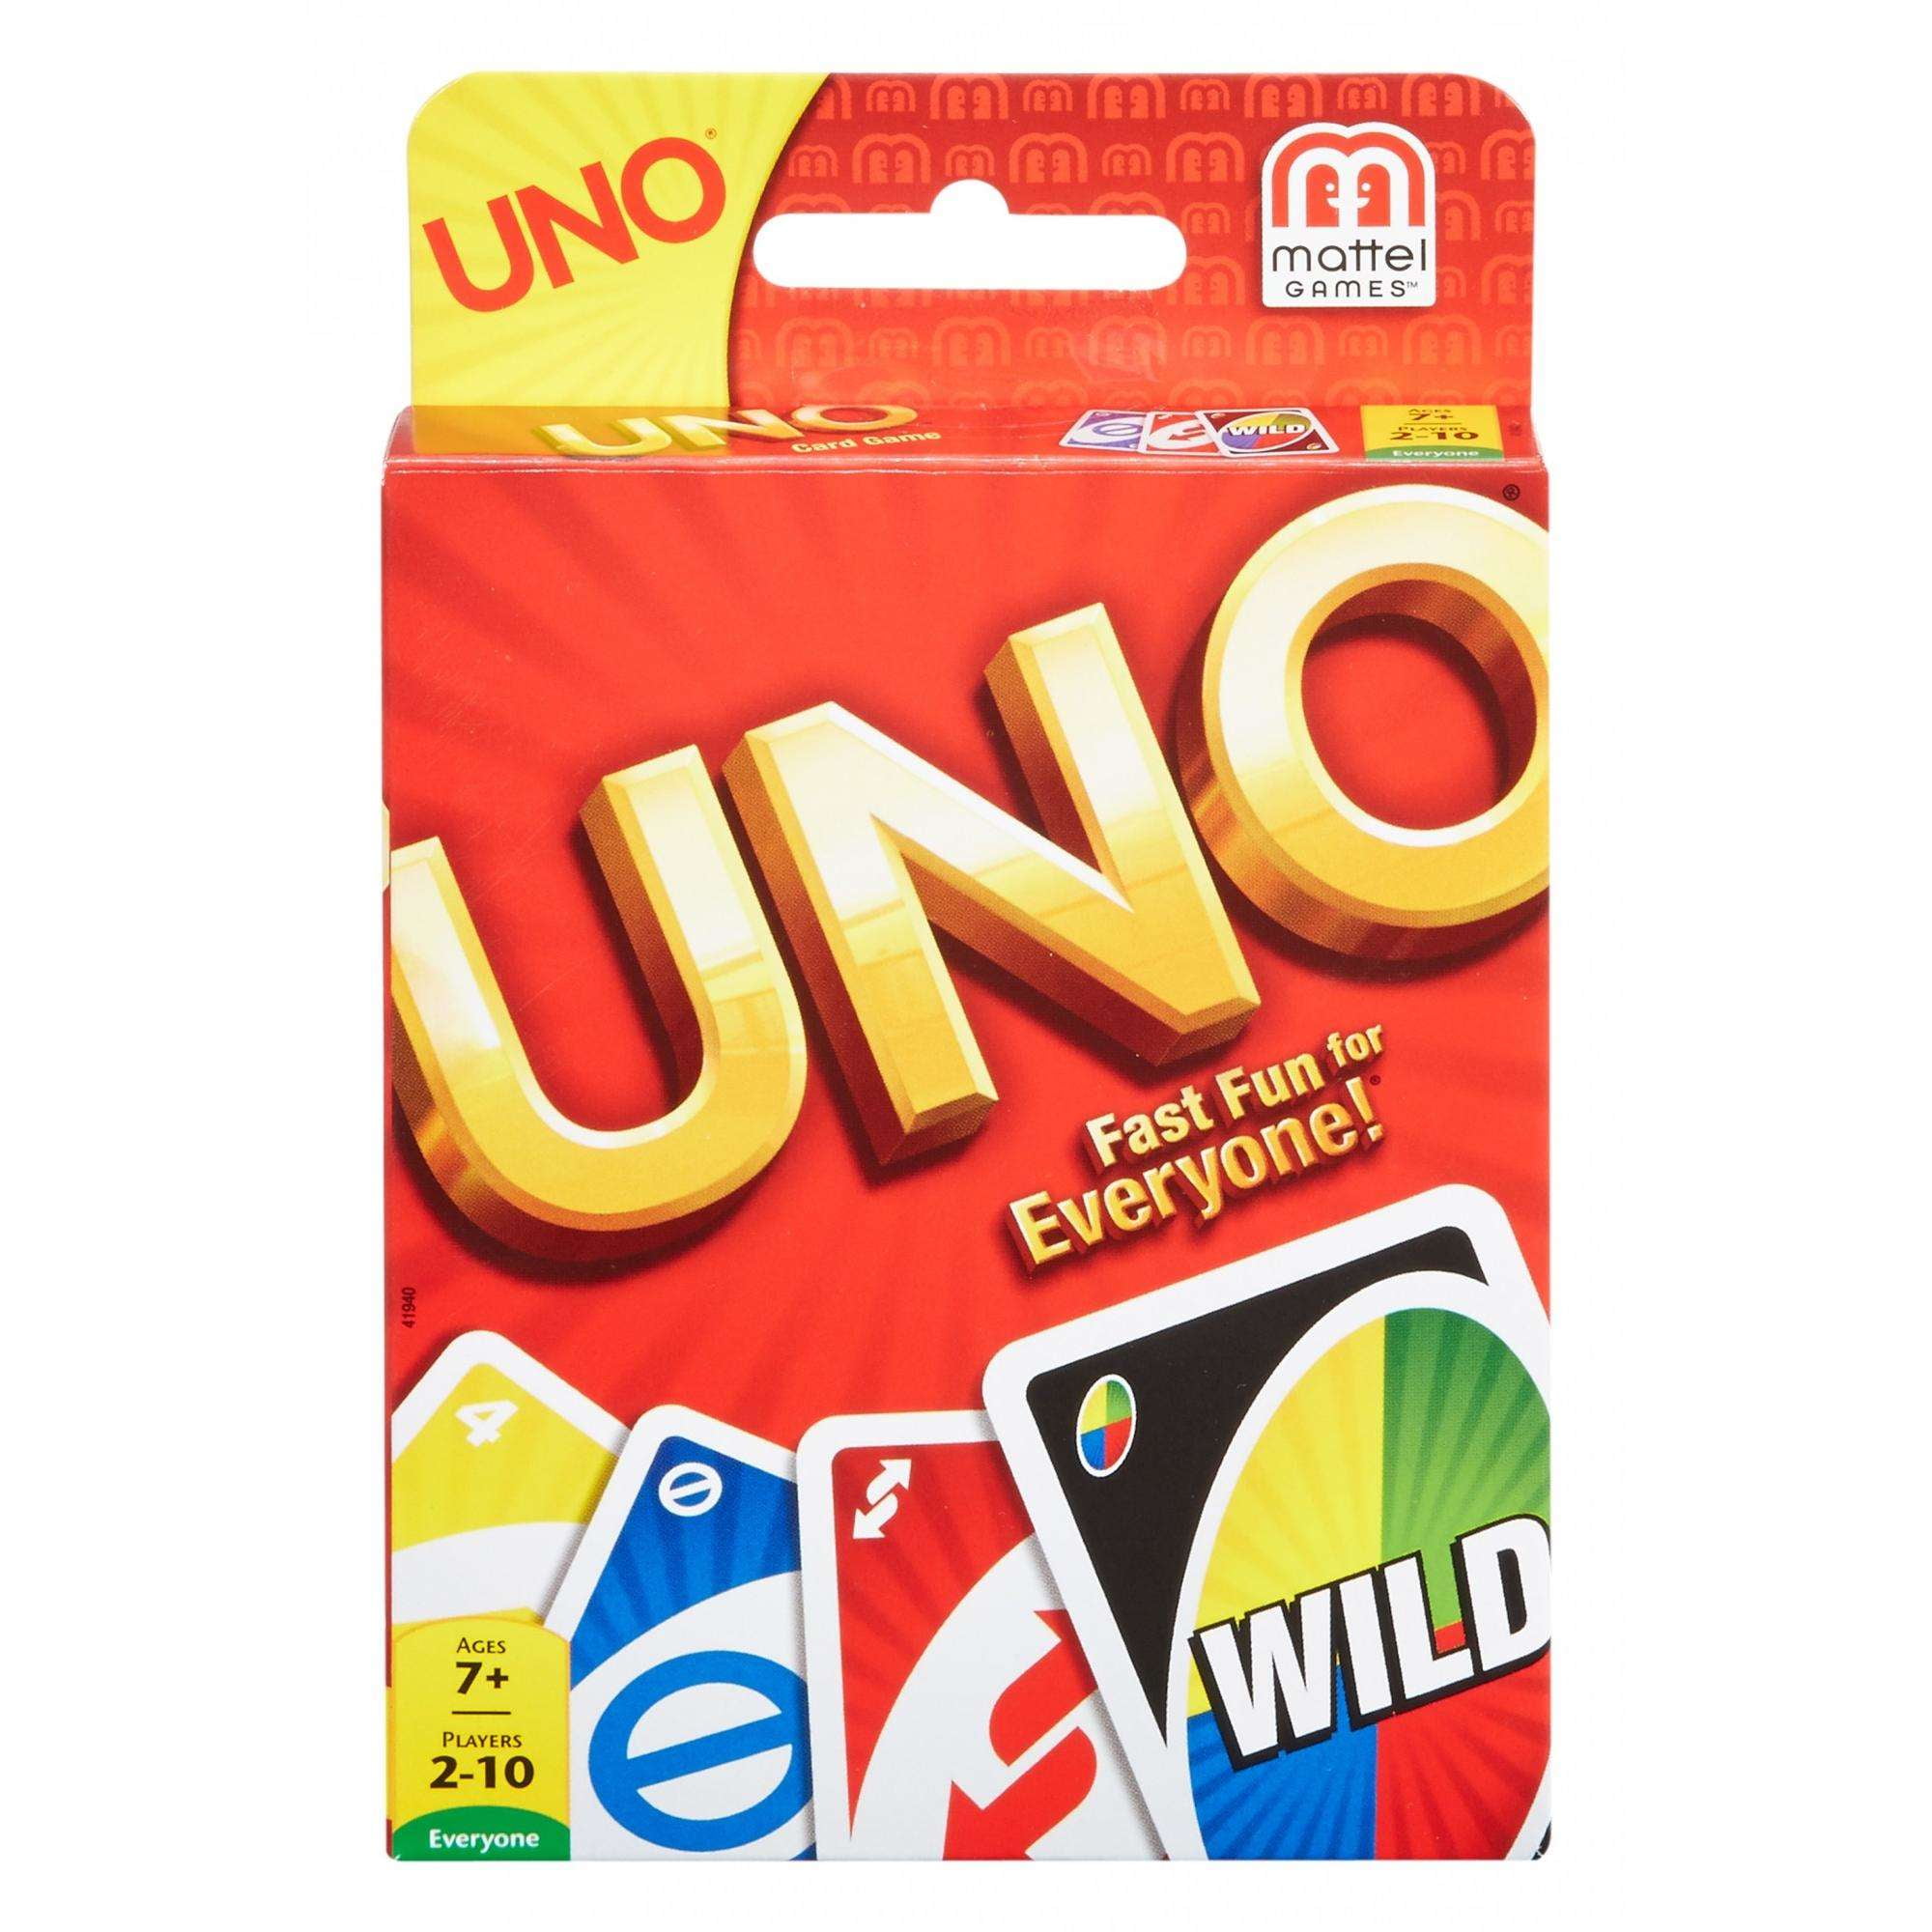 2-10 Players Mattel Games NEW UNO Classic Card Game 7 